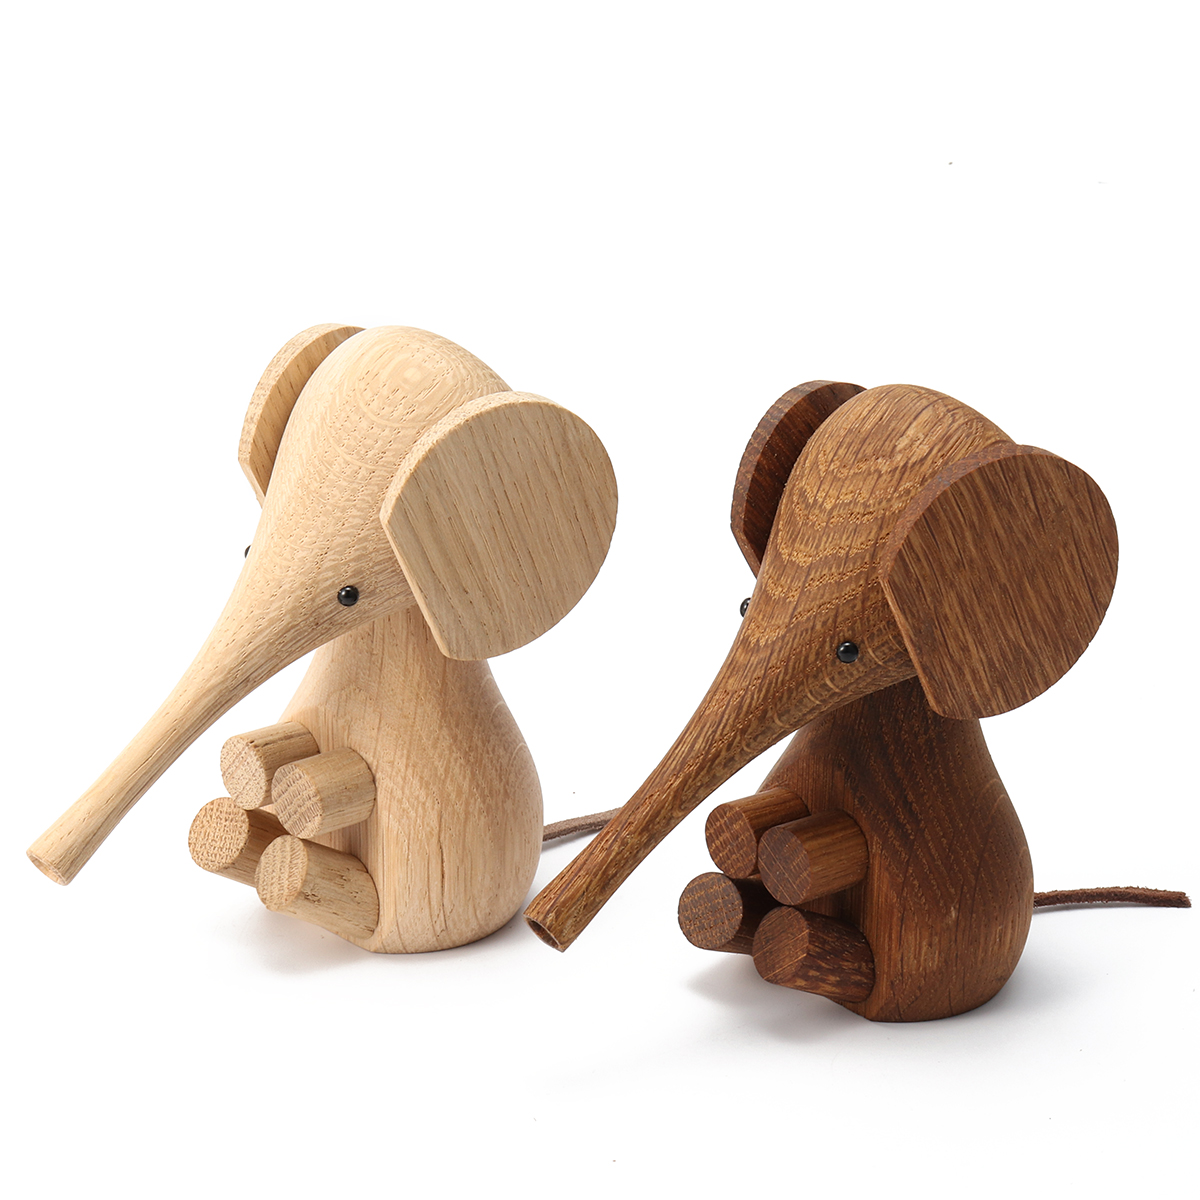 Adjustable-Handicraft-Elephant-Wooden-Animal-Doll-Smooth-Surface-Home-Decorations-Gift-1640775-7